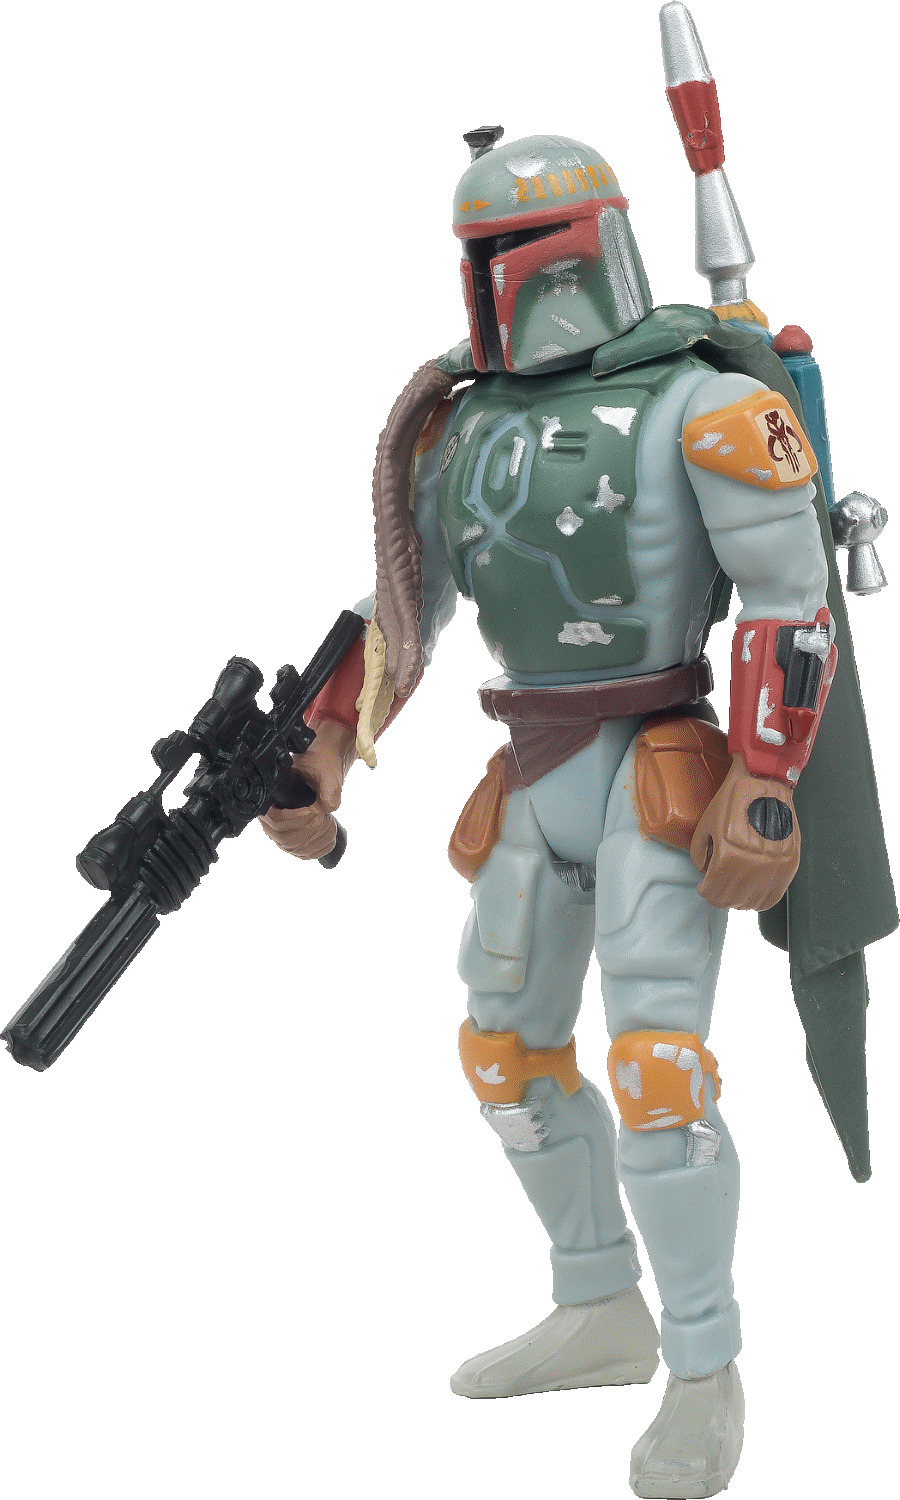 Boba_Fett_with_Sawed-Off_Blaster_Rifle_and_Jet_Pack_(69582)_P.gif